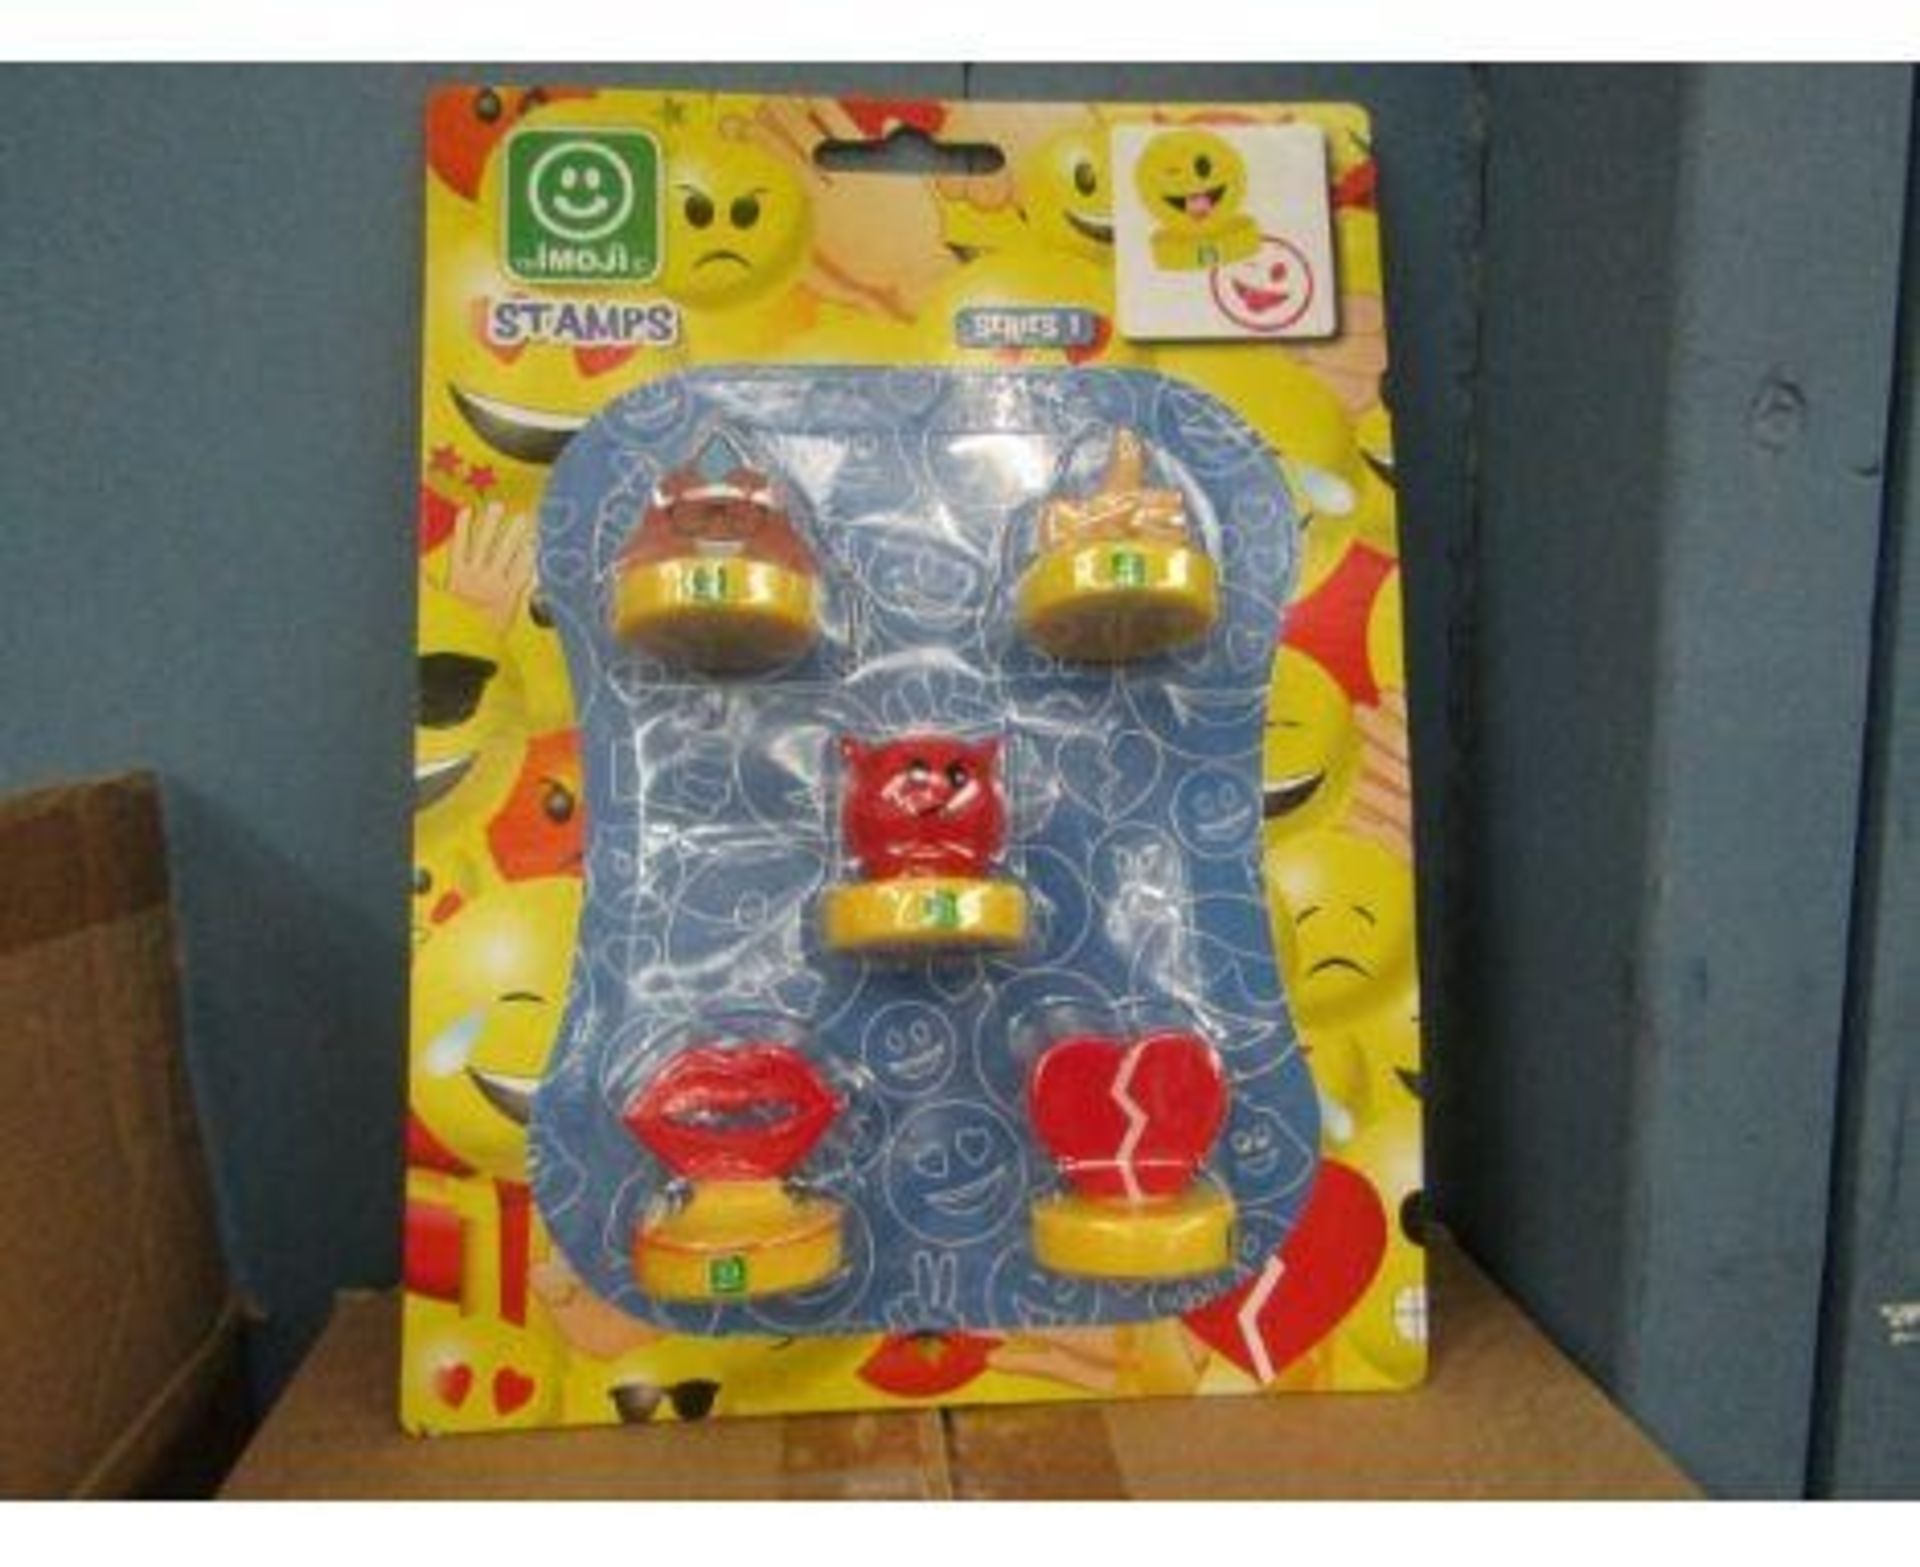 10 x EMOJI STAMPS SETS, NEW AND PACKAGED, RRP £29.90, NO RESERVE *NO VAT*